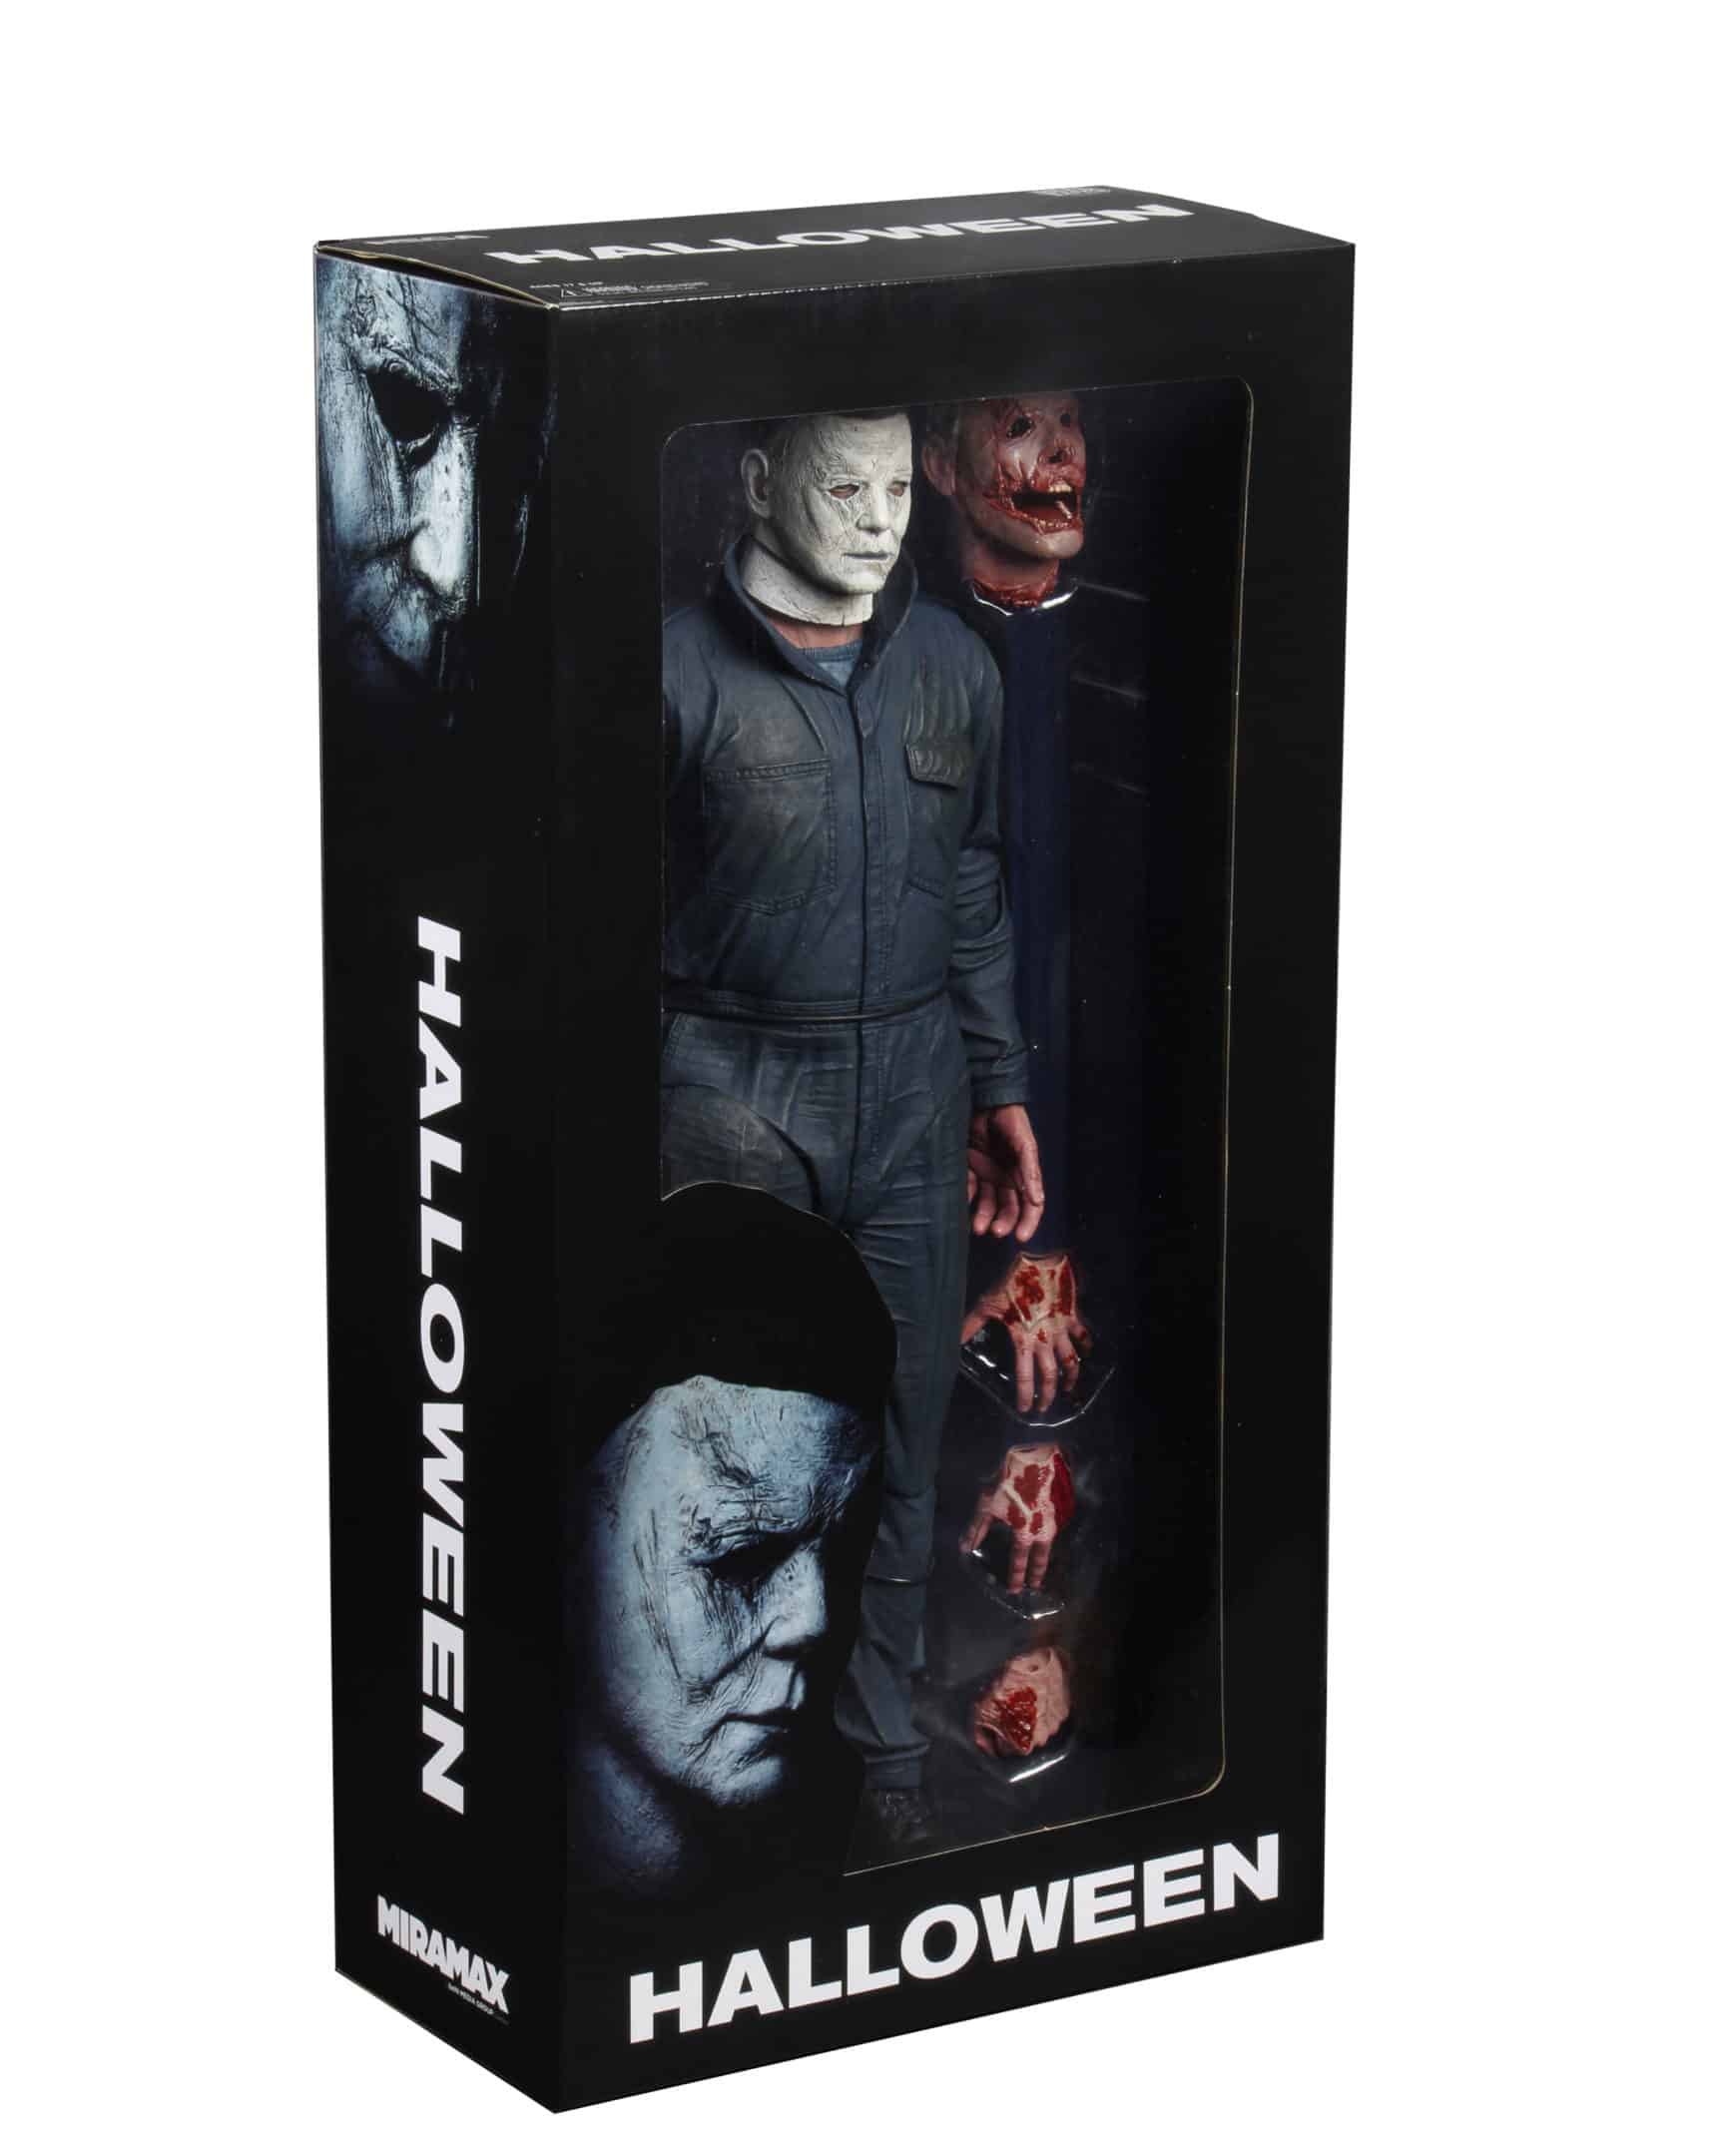 The NECA Vault reopens with limited edition Horror and Batman figures to close out 2022 3